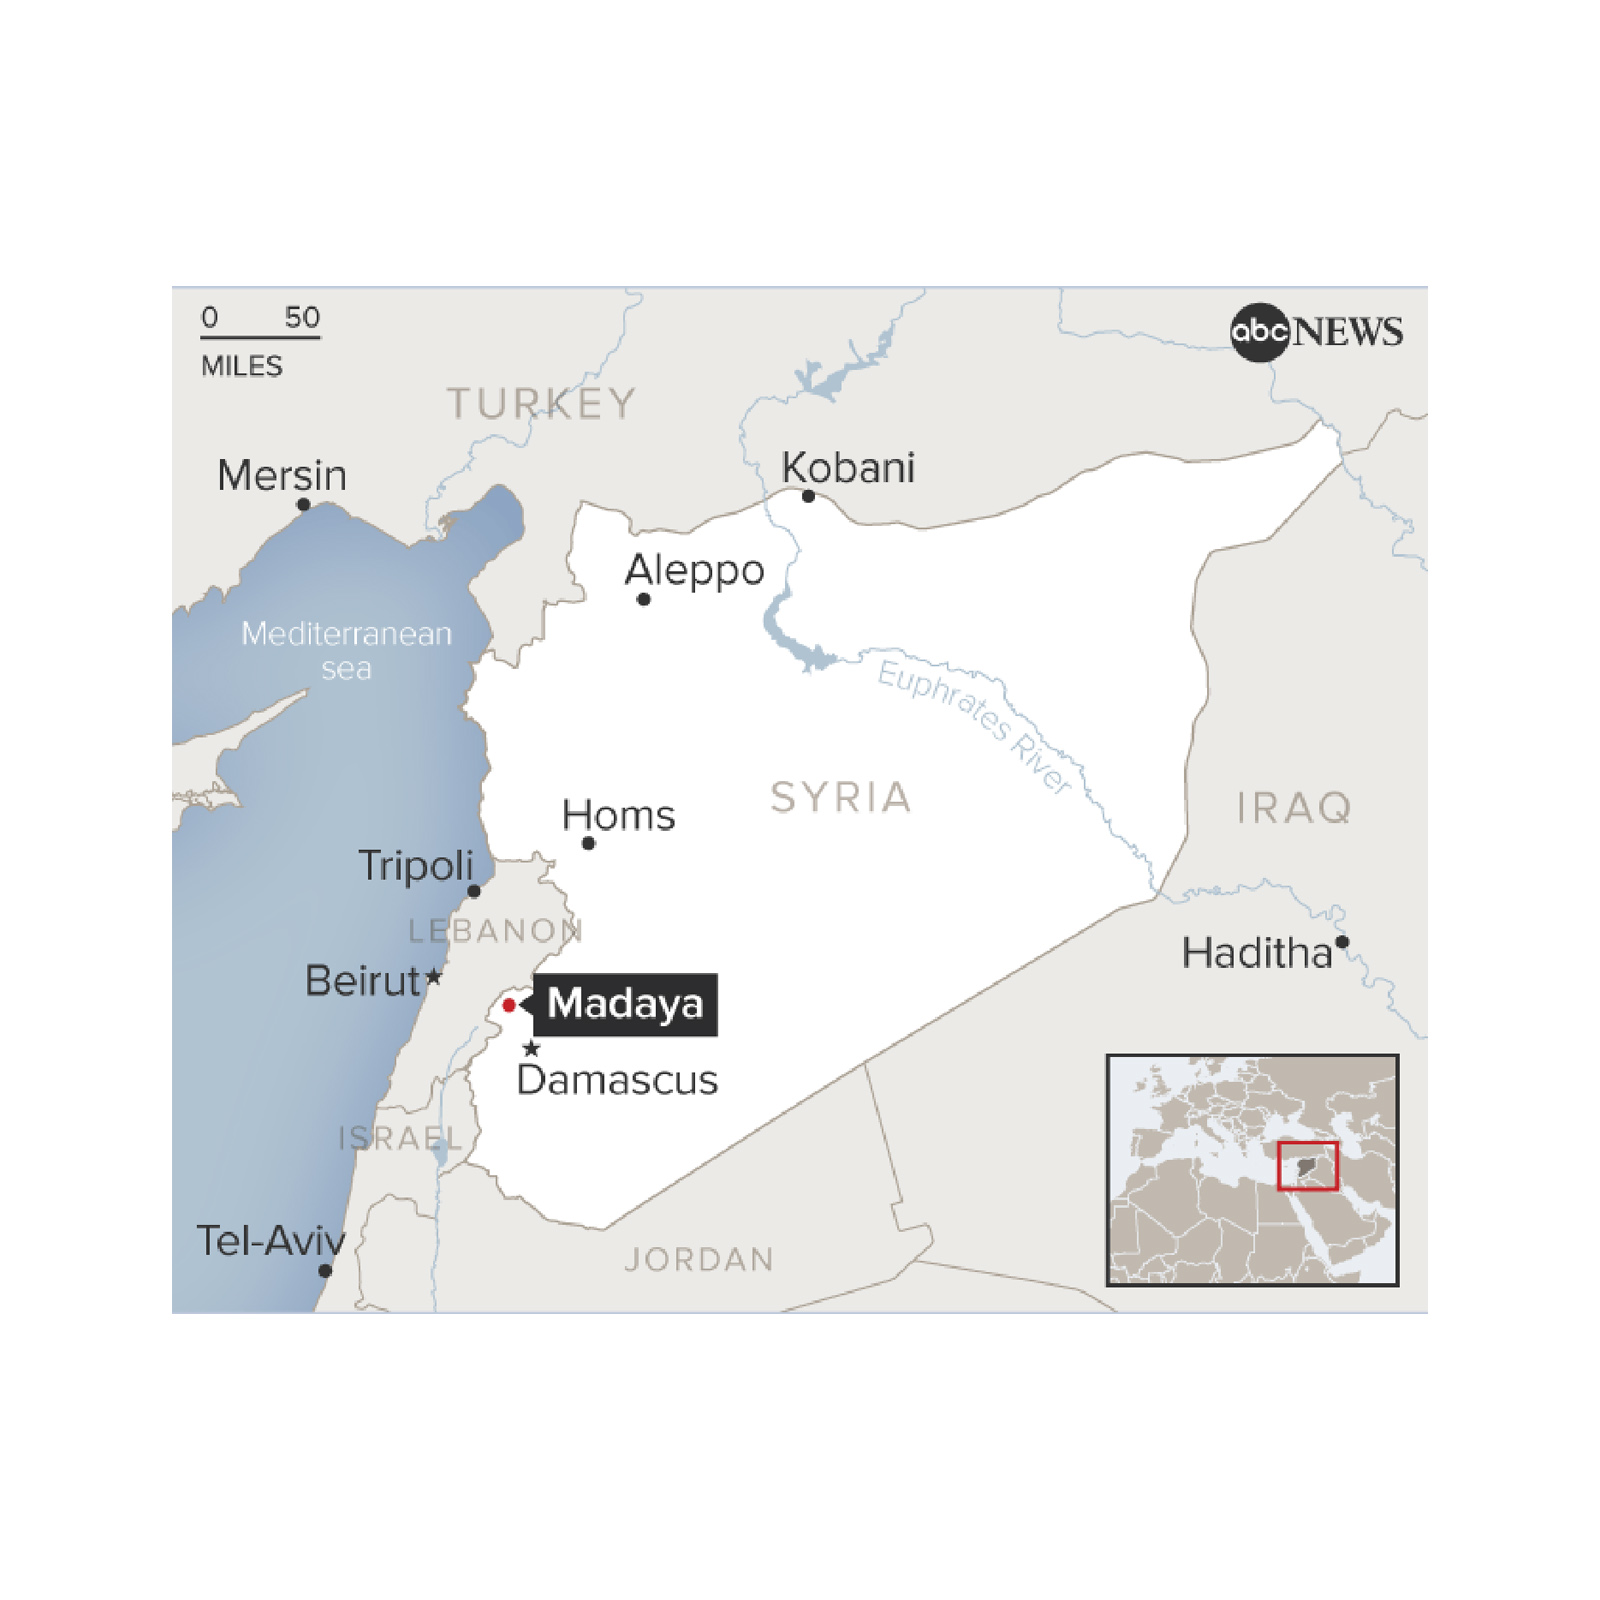 PHOTO: A map shows the location of Madaya in Syria.